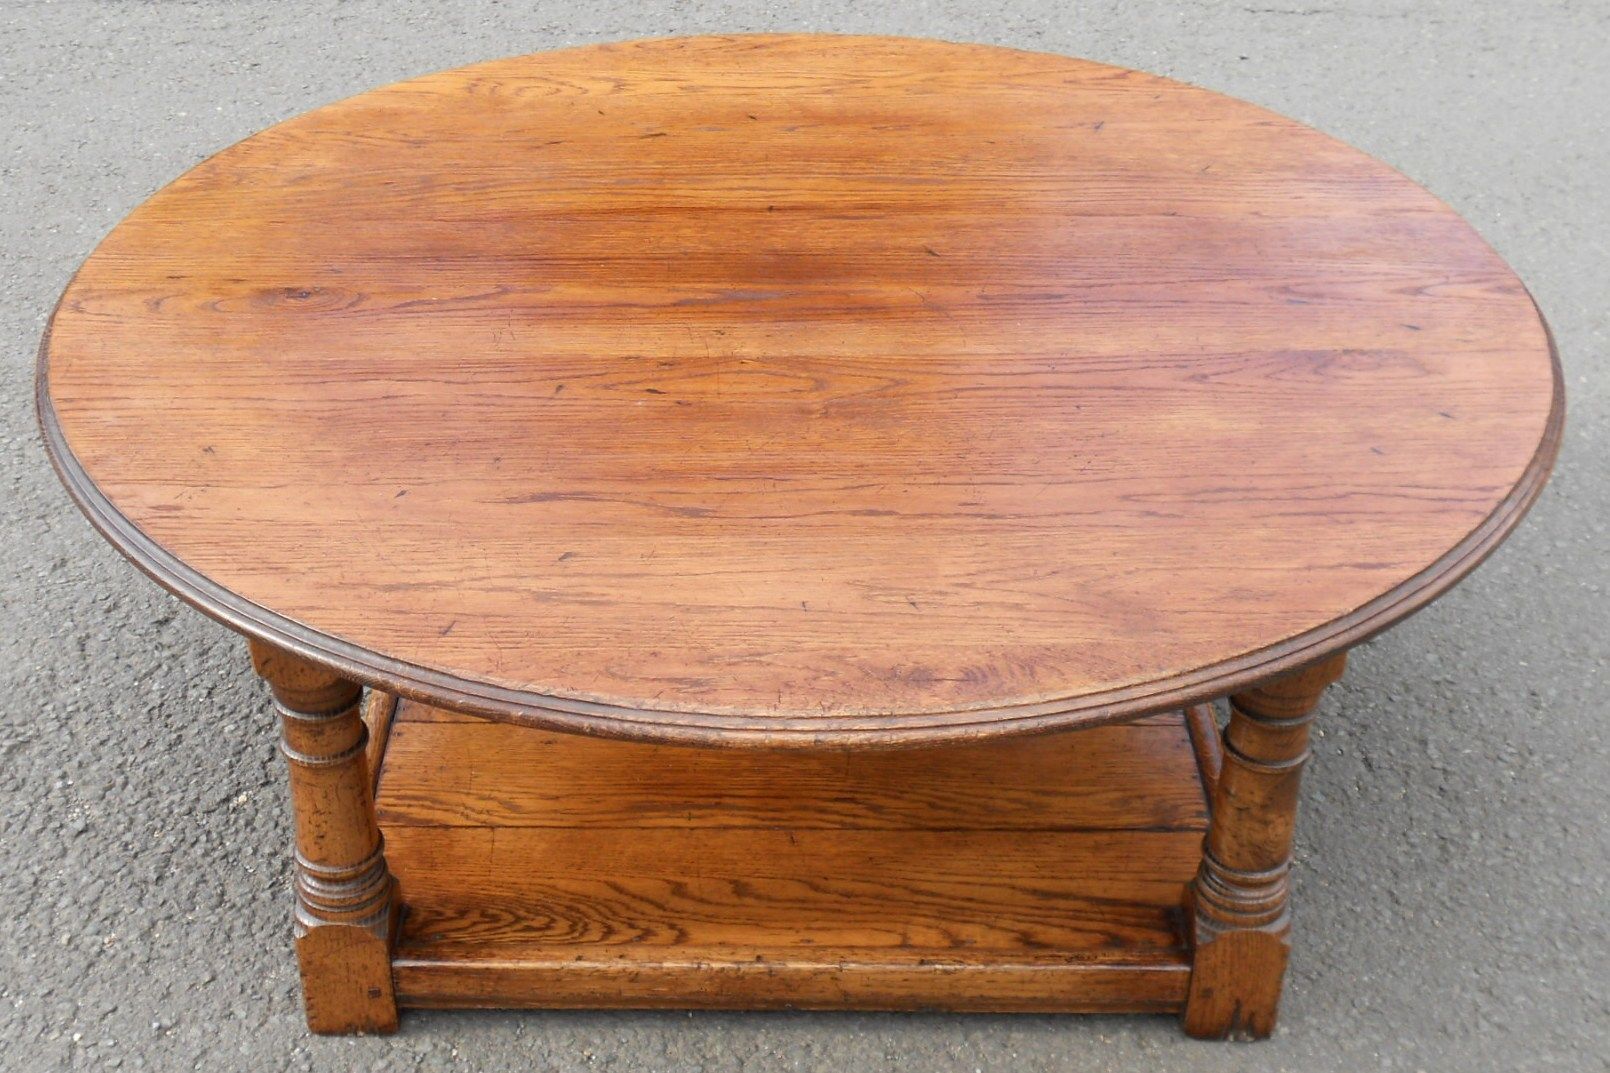 Large Round Oak Coffee Table Large Round Coffee Table Large Round End Tables Top Coffee Tables Review (View 6 of 10)